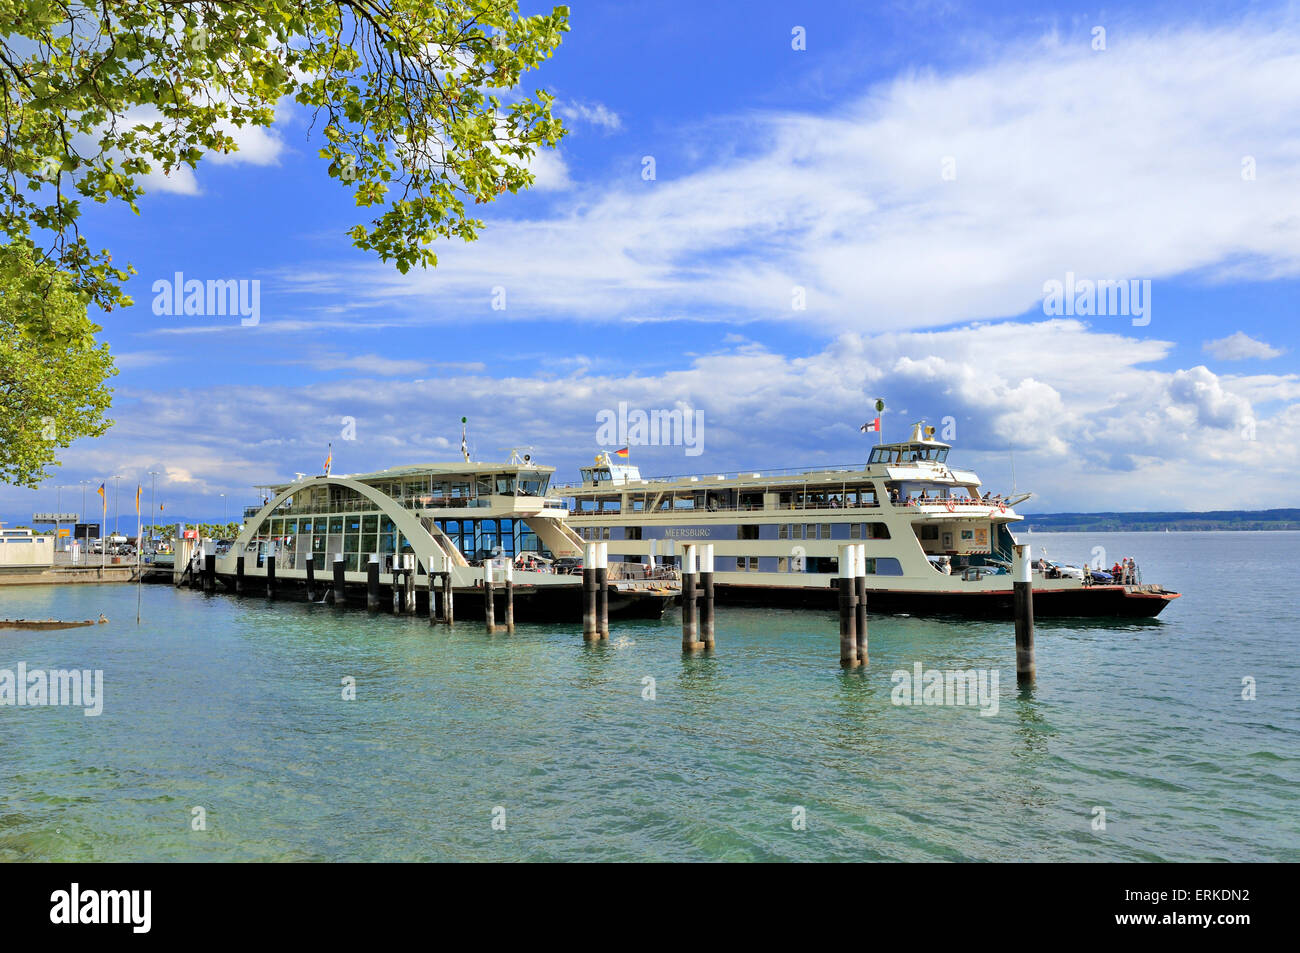 Car ferries at the ferry dock, Lake Constance, Meersburg am Bodensee, Baden-Württemberg, Germany Stock Photo